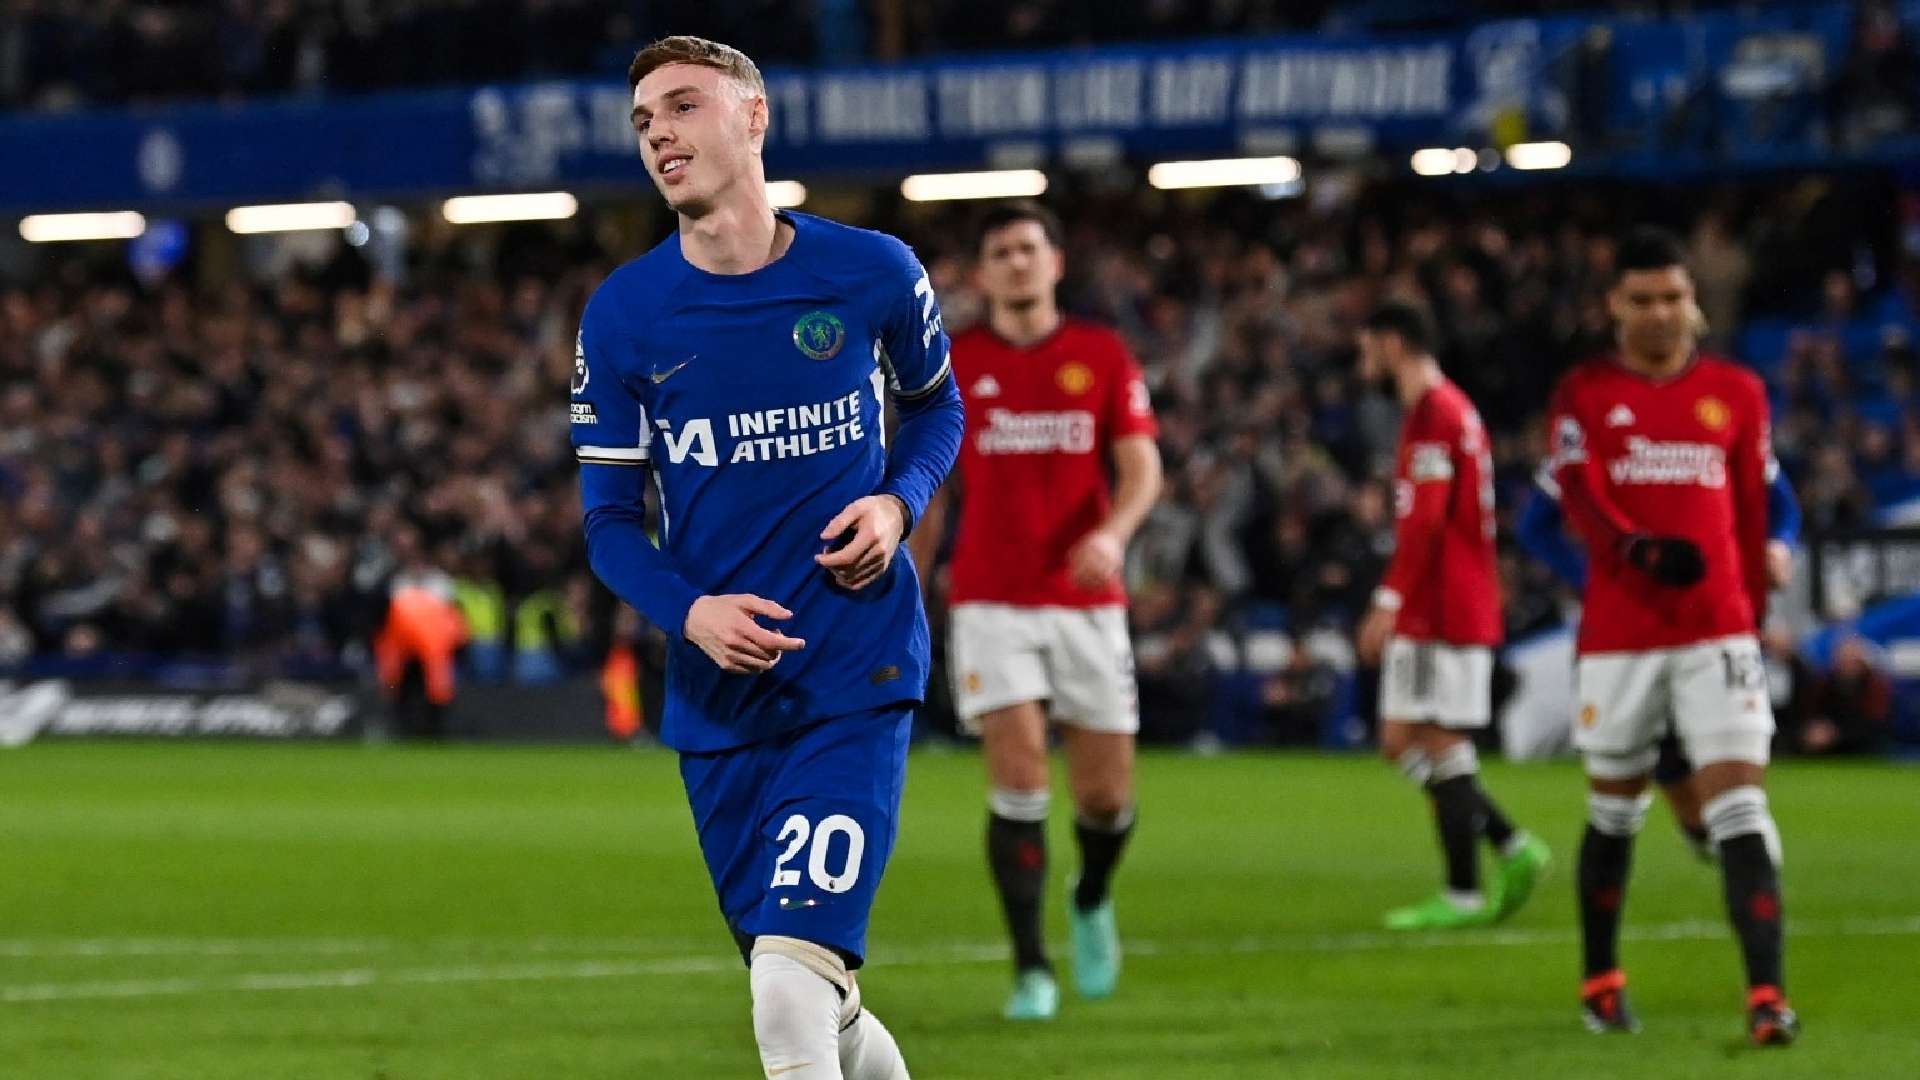 Madness!' - Chelsea hat-trick hero Cole Palmer left stunned as his late goals seal 4-3 win in 'crazy' end against Man Utd | Goal.com